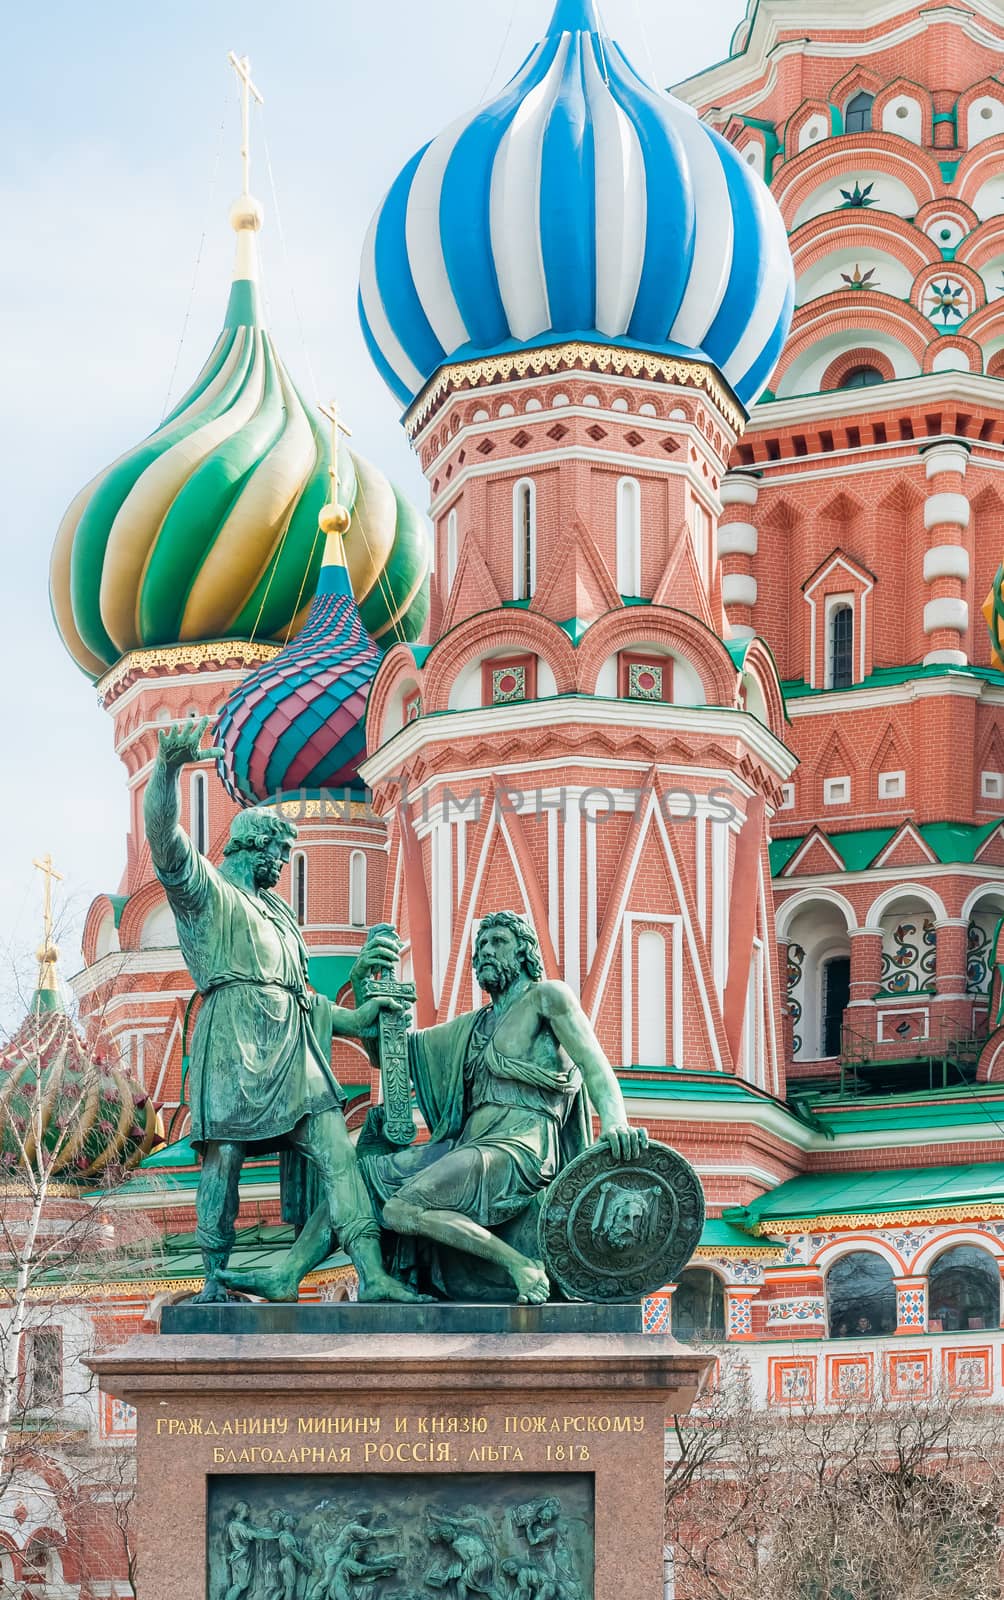 Monument to Minin and Pozharsky with the words: “To Citizen Minin and Prince Pozharsky from grateful Russia”. In background some of the colored steeples ot Saint Basil's Cathedral in Moscow, Russia